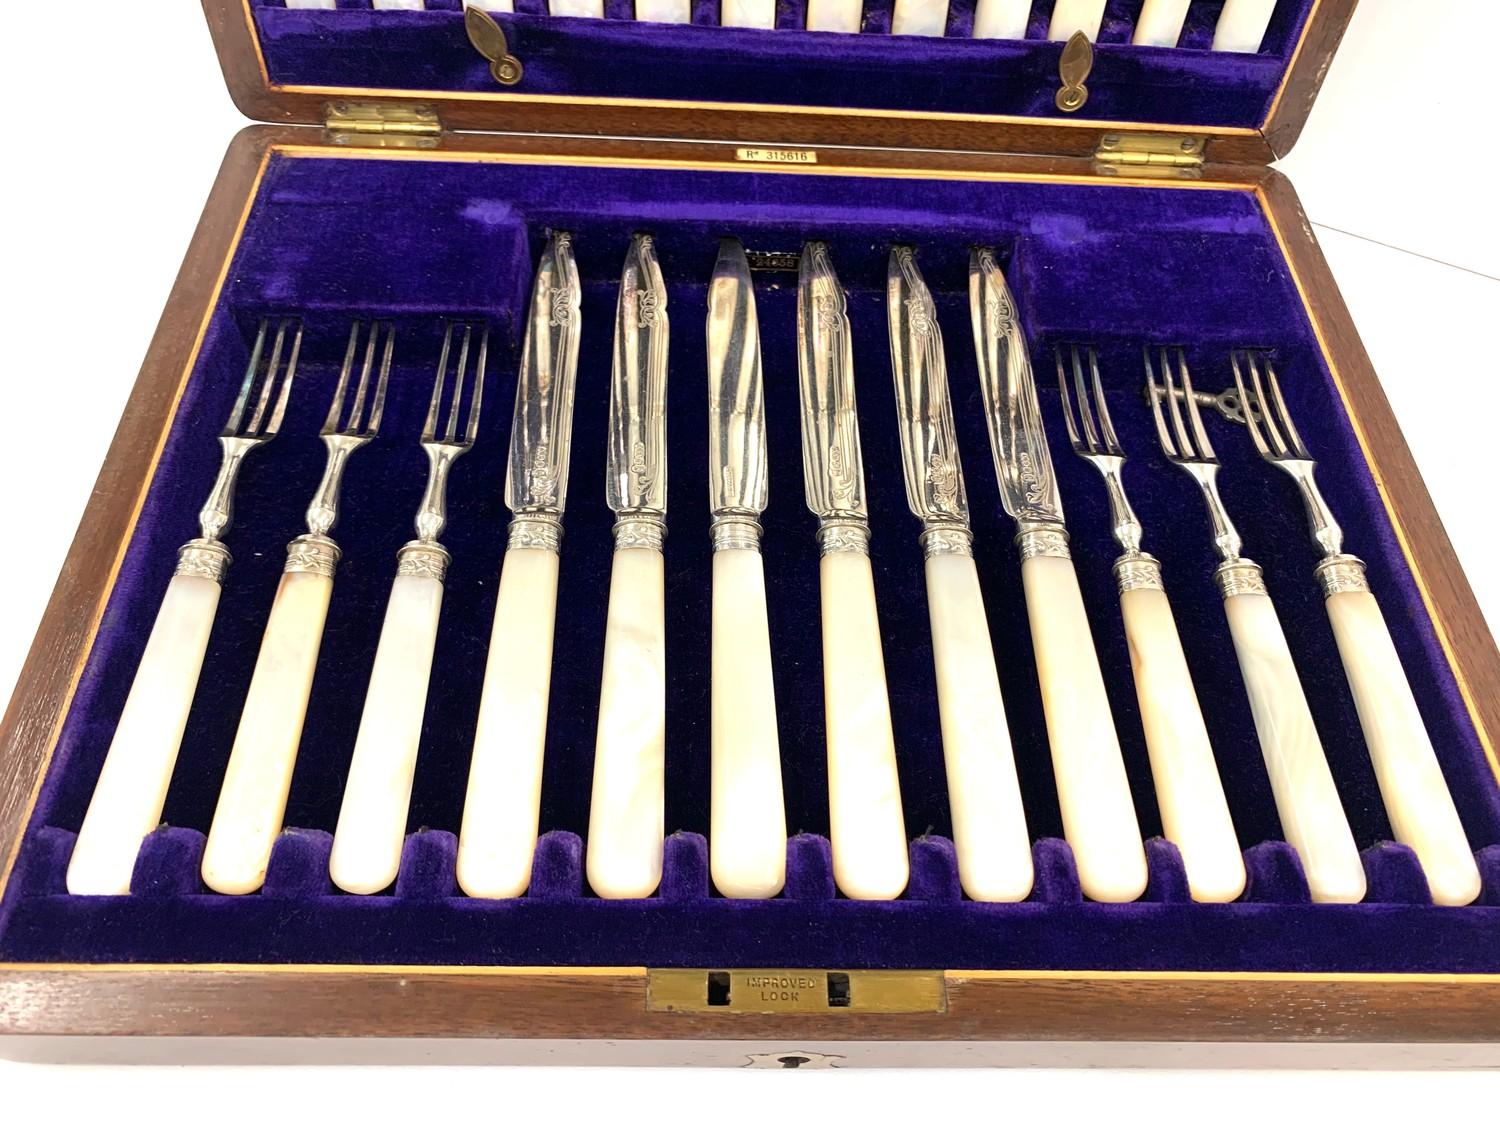 Boxed antique mother of pearl handle 12 setting fish knives and forks in good original condition - Image 2 of 4